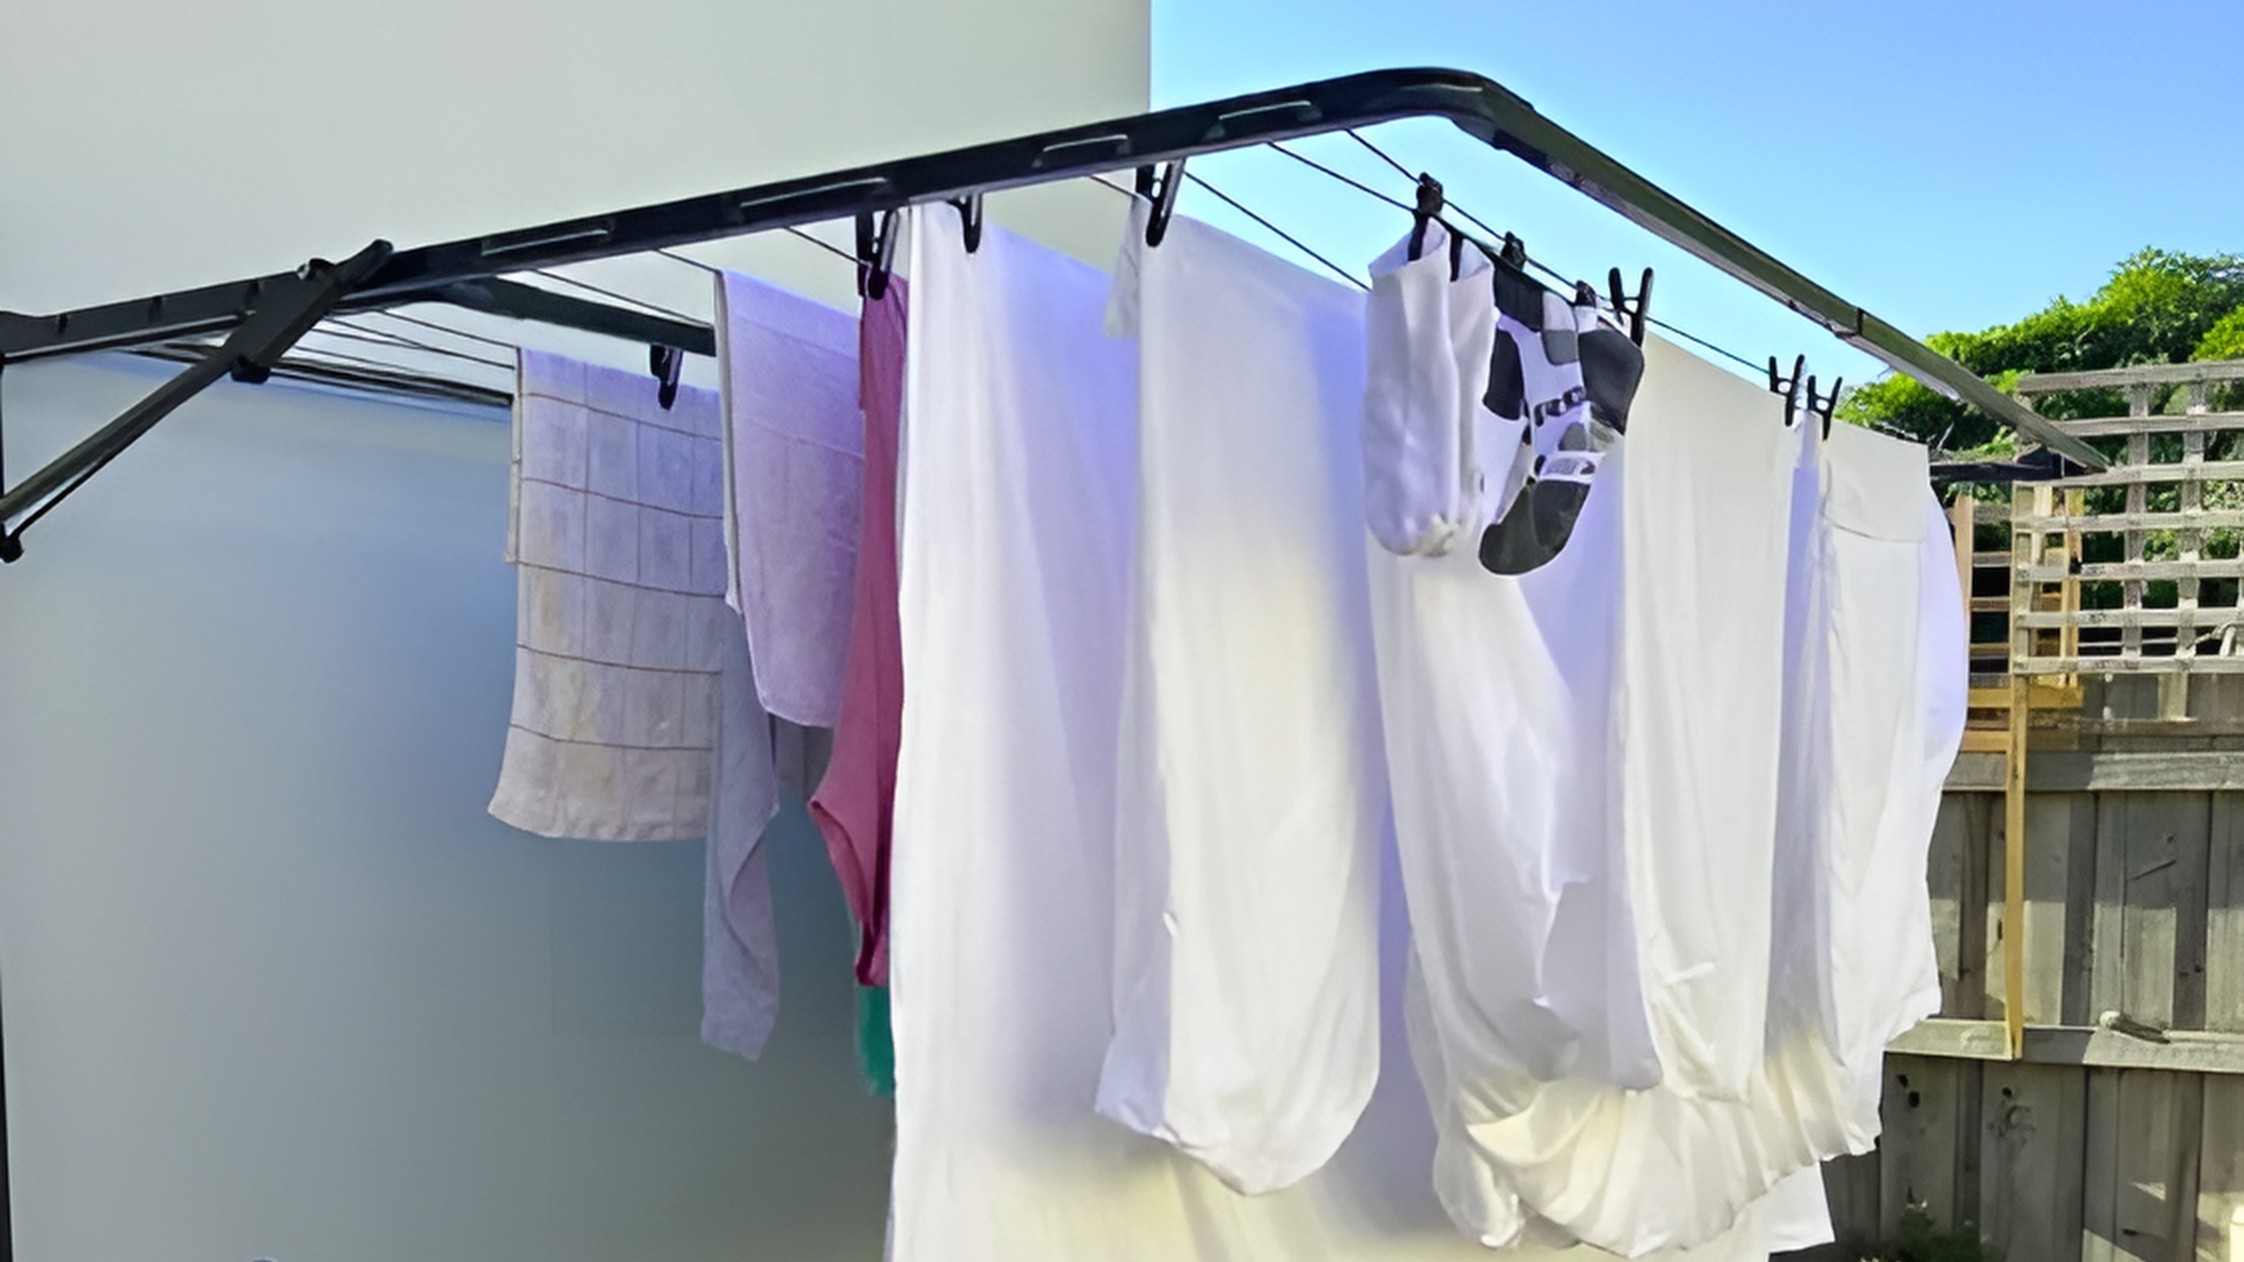 Top 7 Heavy Duty Fold Down Clothesline Picks in Australia: Ultimate Durability Meets Space-Saving Design